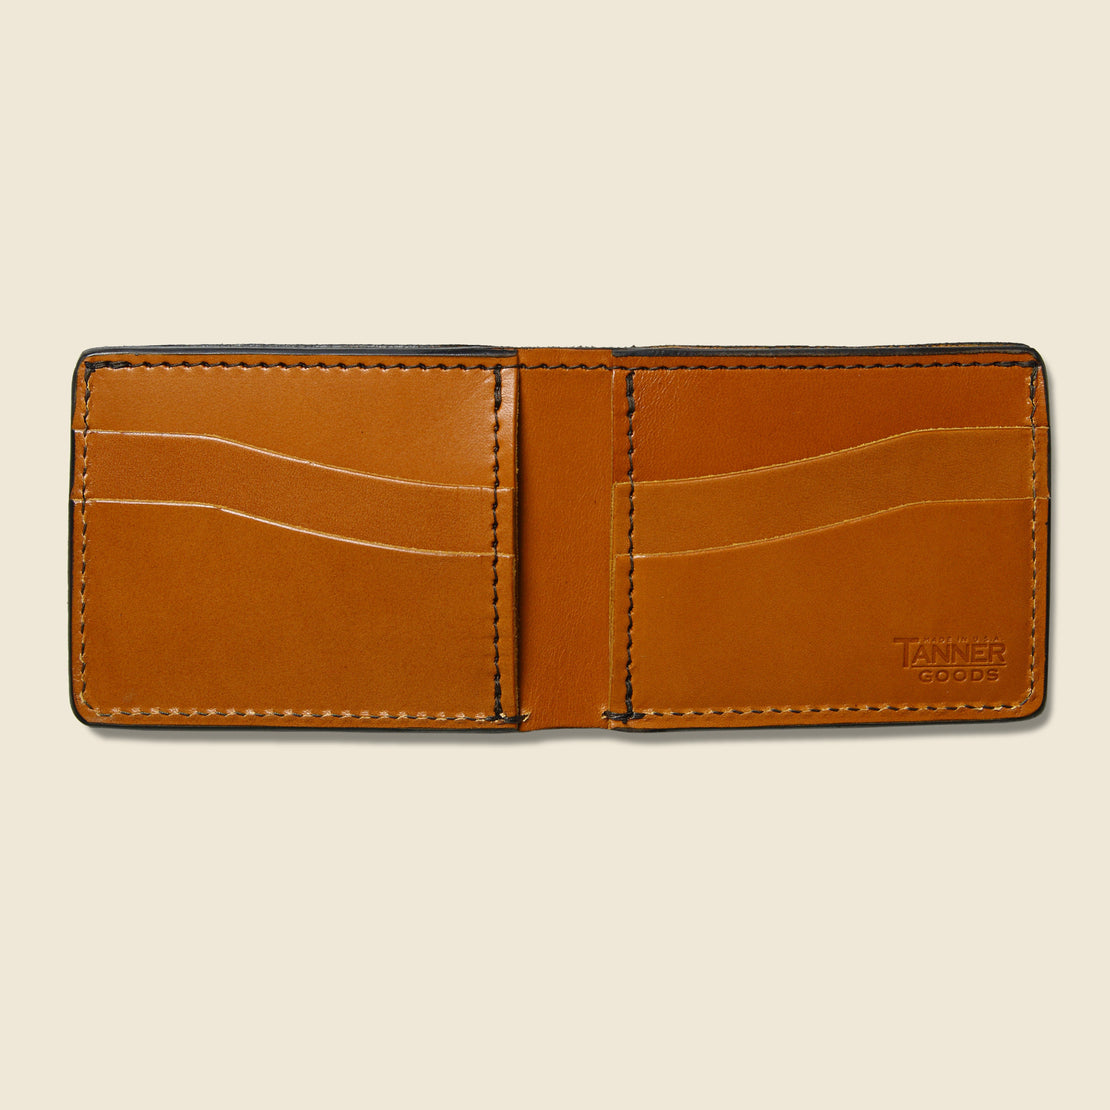 Utility Bifold Wallet - Saddle Tan - Tanner - STAG Provisions - Accessories - Wallets